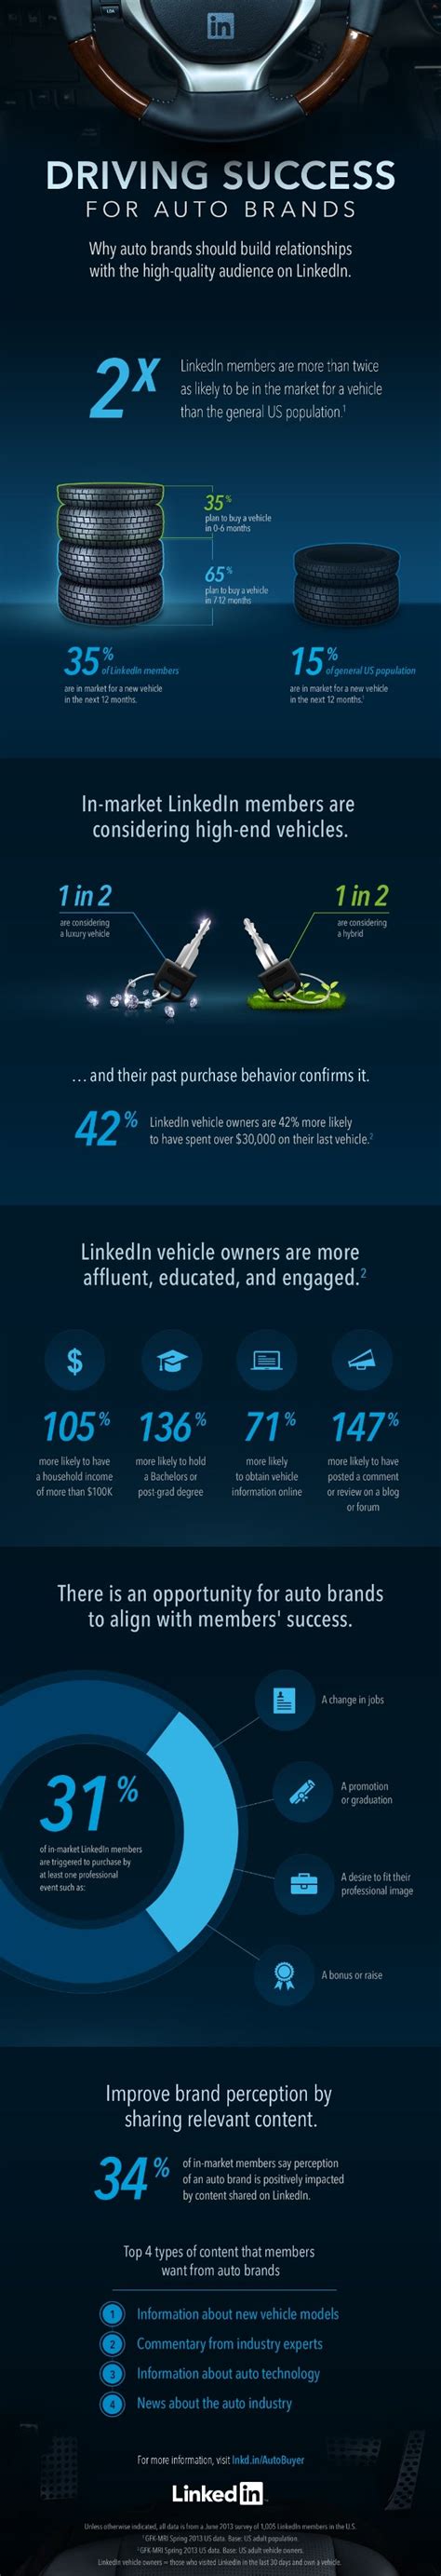 Driving Success For Auto Brands On Linkedin Infographic